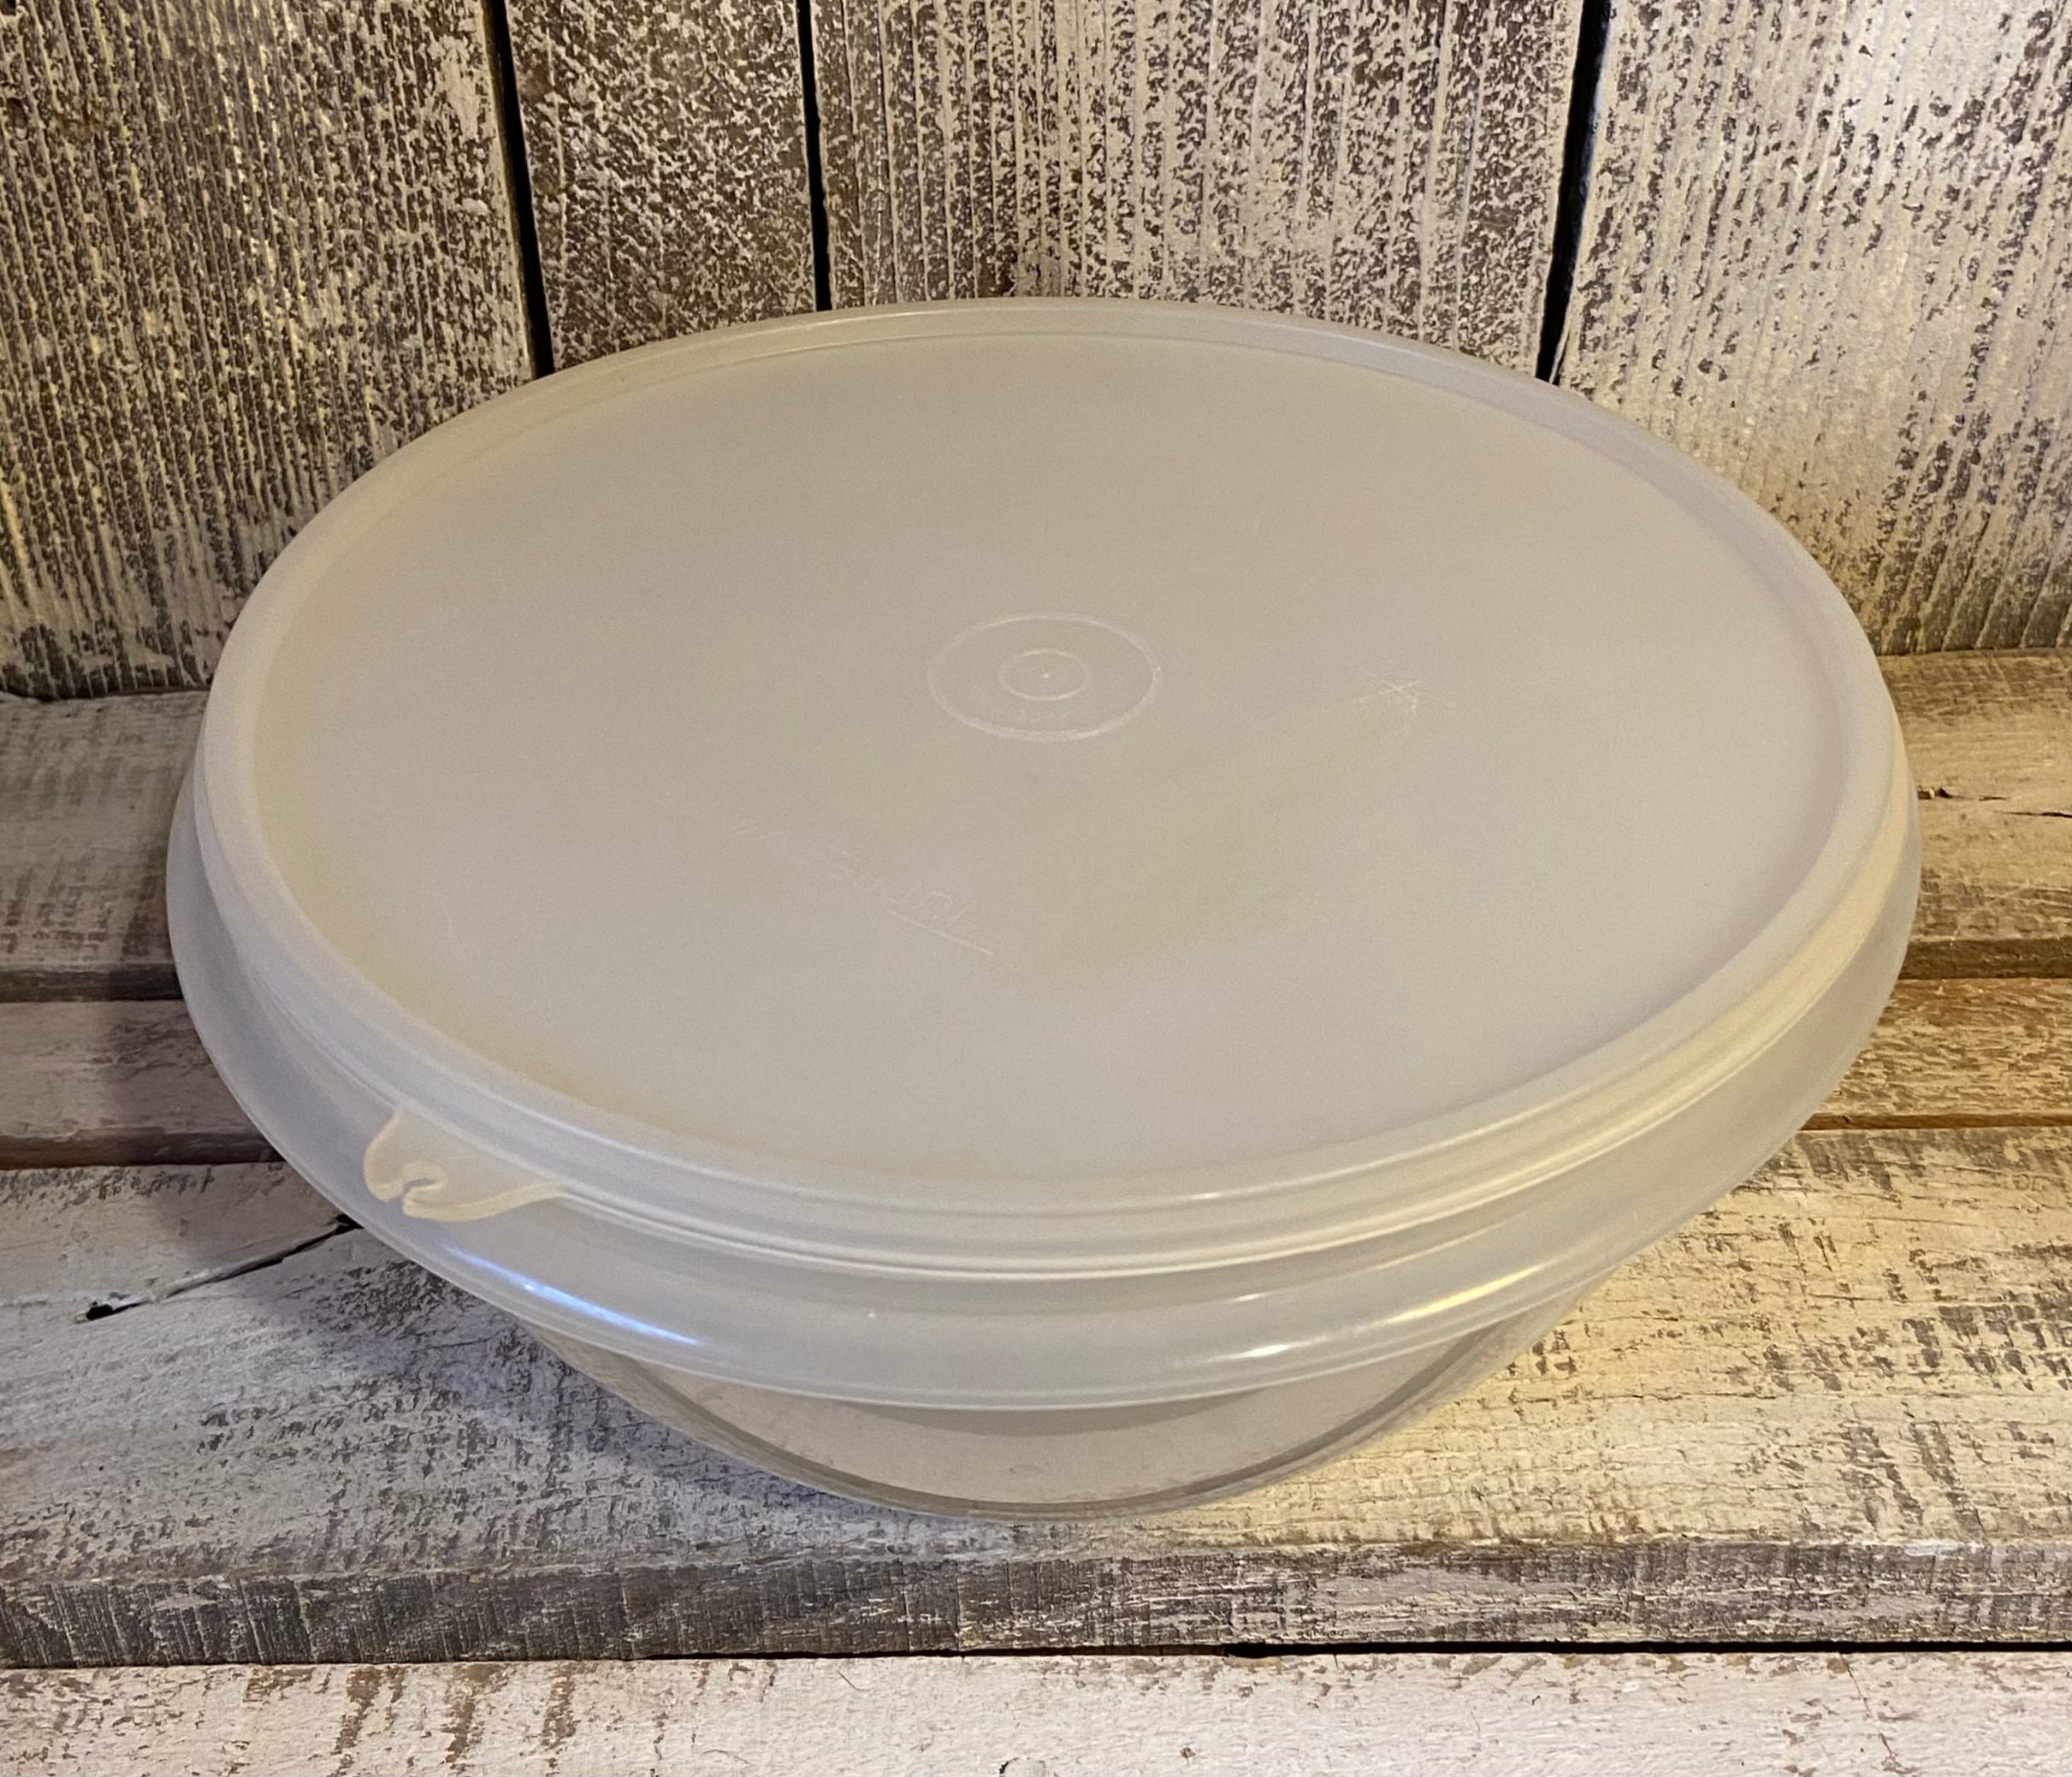 20 Years Later, Will Tupperware Warranty Get My Tupperware Replaced?